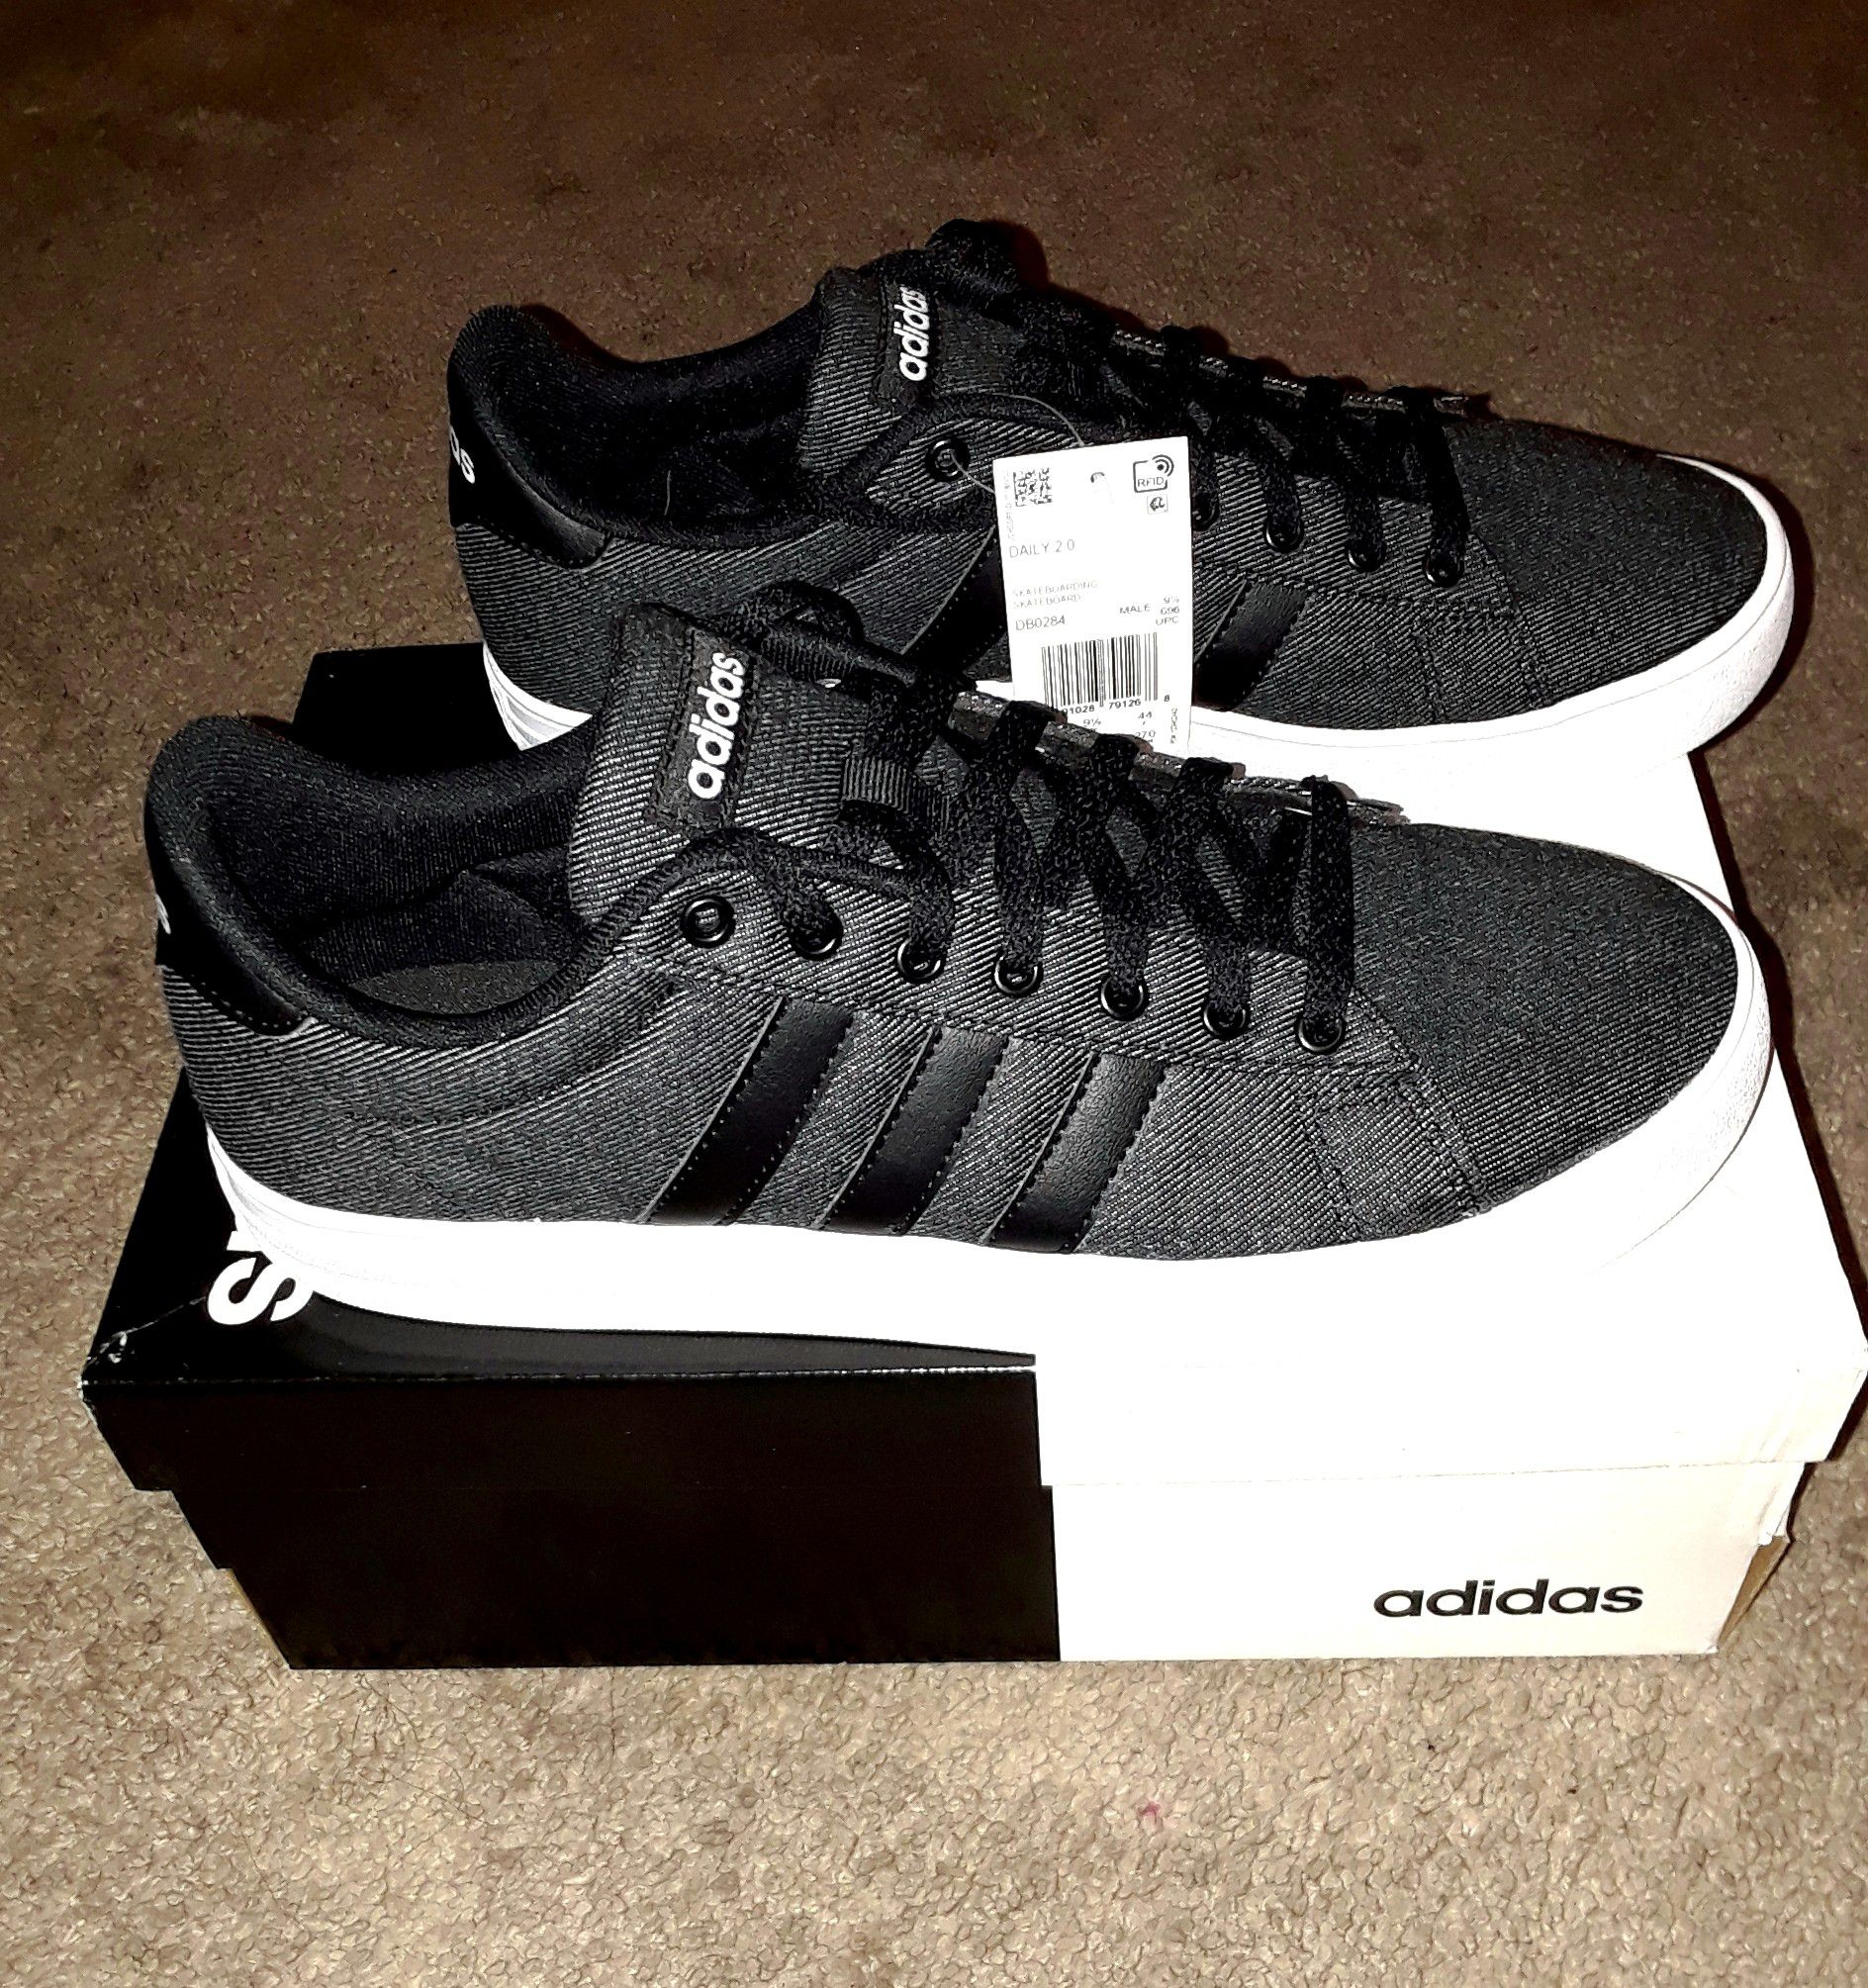 NEW ADIDAS SHOES FOR MEN SIZE 10 THEY COME WITH THE BOX $45